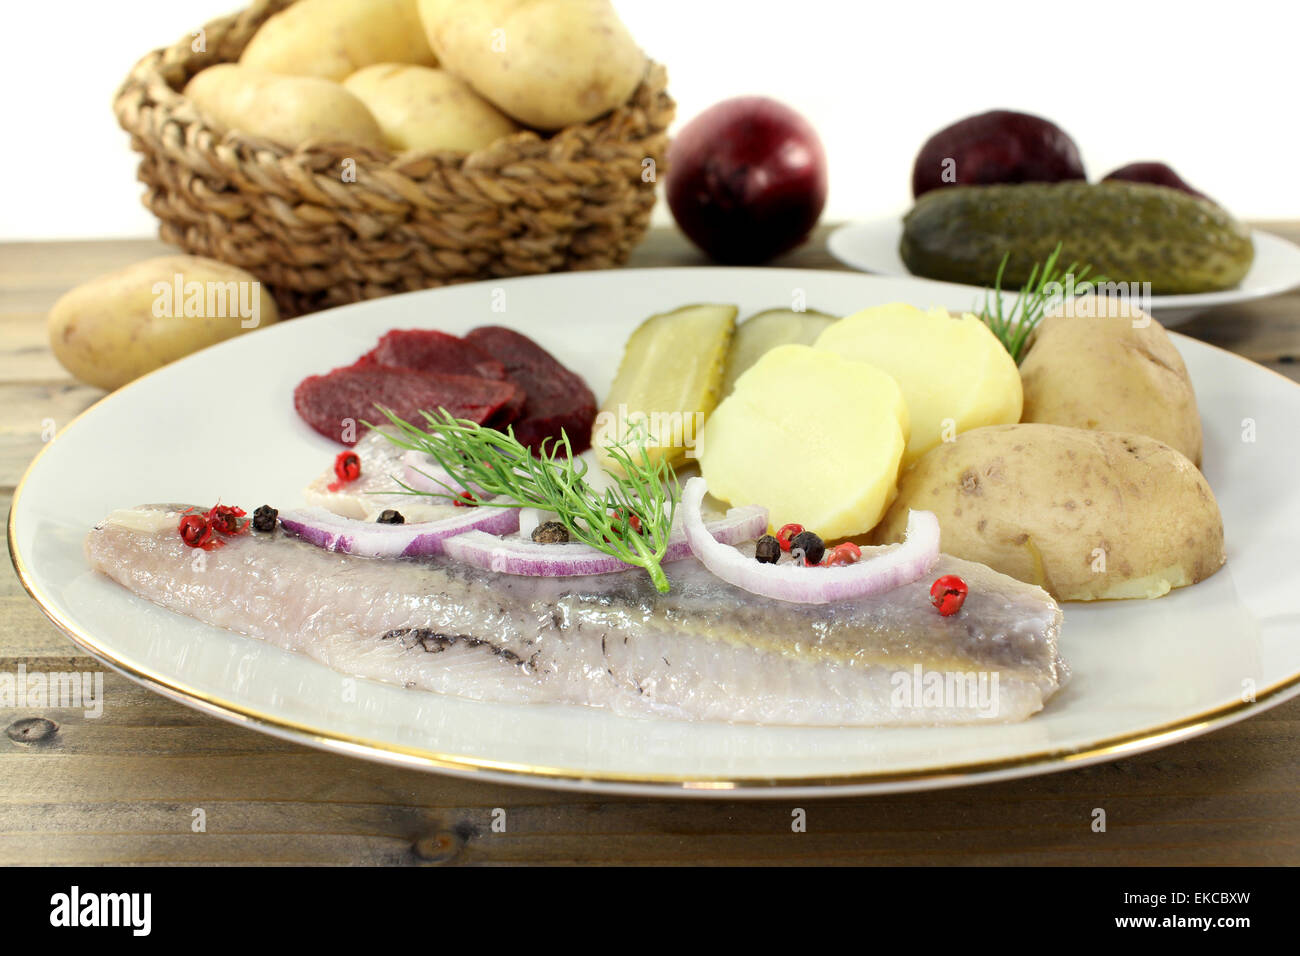 a plate of pickled herring fillet, boiled potatoes, beetroot and pickled gherkins Stock Photo